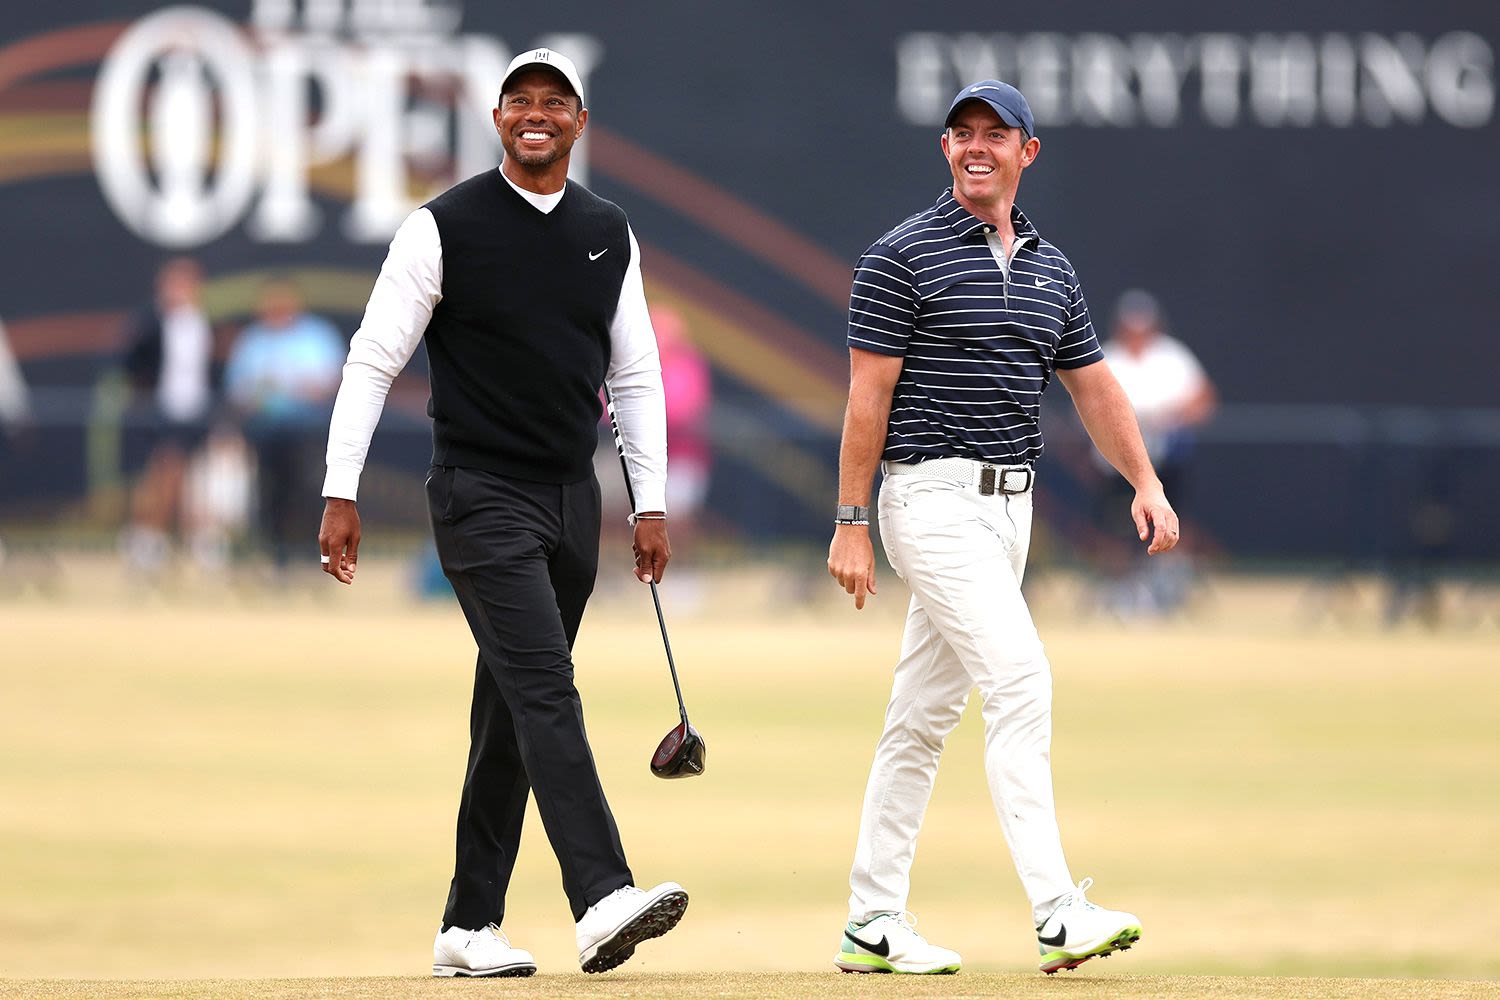 Rory McIlroy Denies He and Tiger Woods Had a Falling Out: ‘Friends Can Have Disagreements’